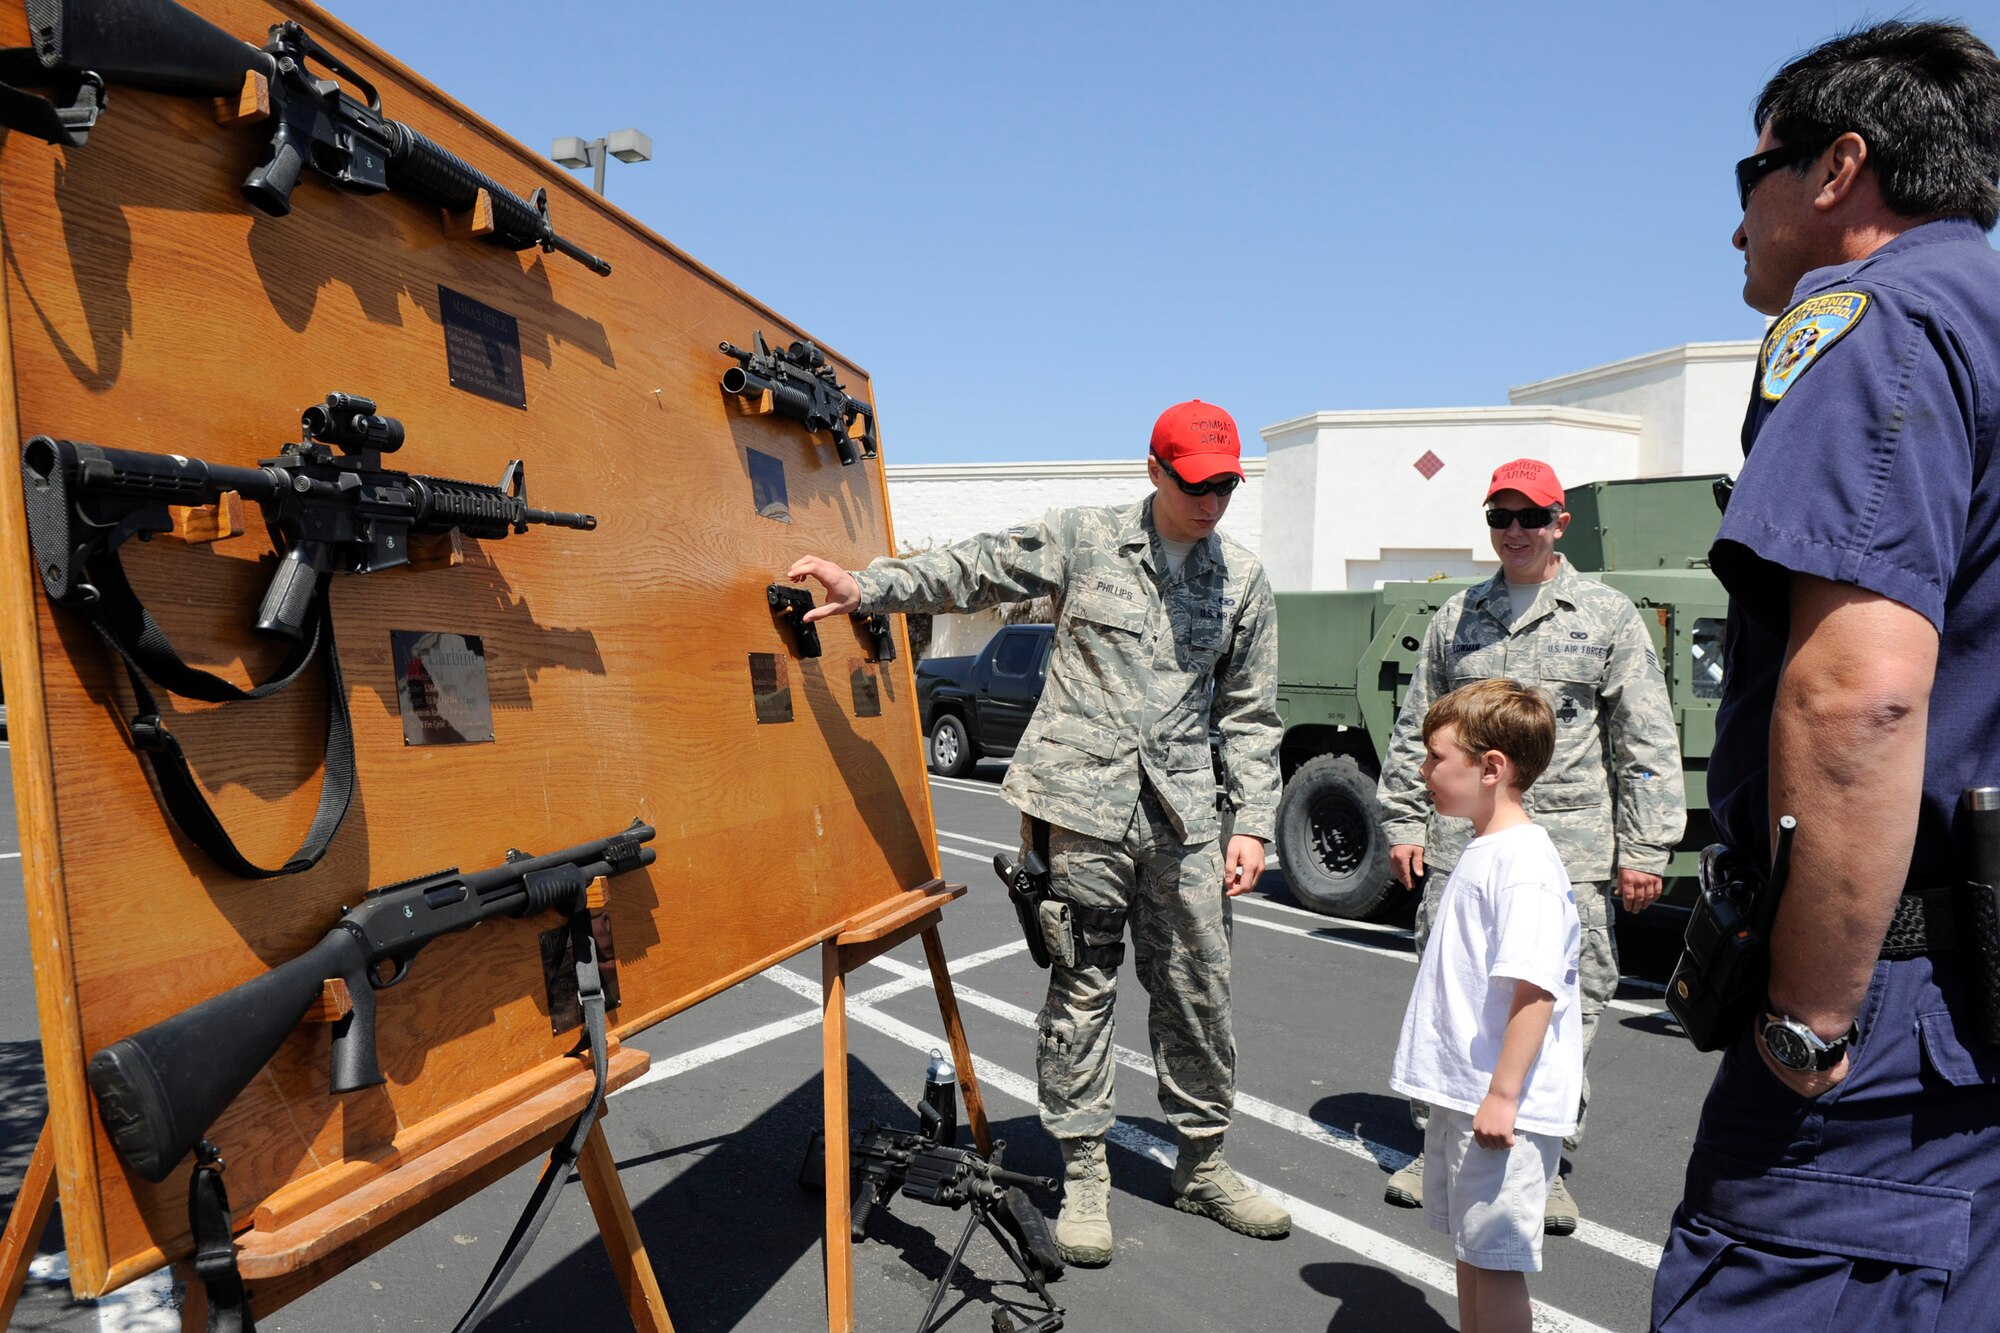 VANDENBERG AIR FORCE BASE, Calif. -- 30th Security Forces Squadron combat arms instructors talk to a local child about weapons used by the U.S. Air Force during a police display event at the Albertsons parking lot in Lompoc, Wednesday, May 16th, 2012. The display was held in conjunction with National Police Week, an annual celebration that recognizes the service and sacrifice of U.S. law enforcement personnel. (U.S. Air Force photo/Staff Sgt. Levi Riendeau)